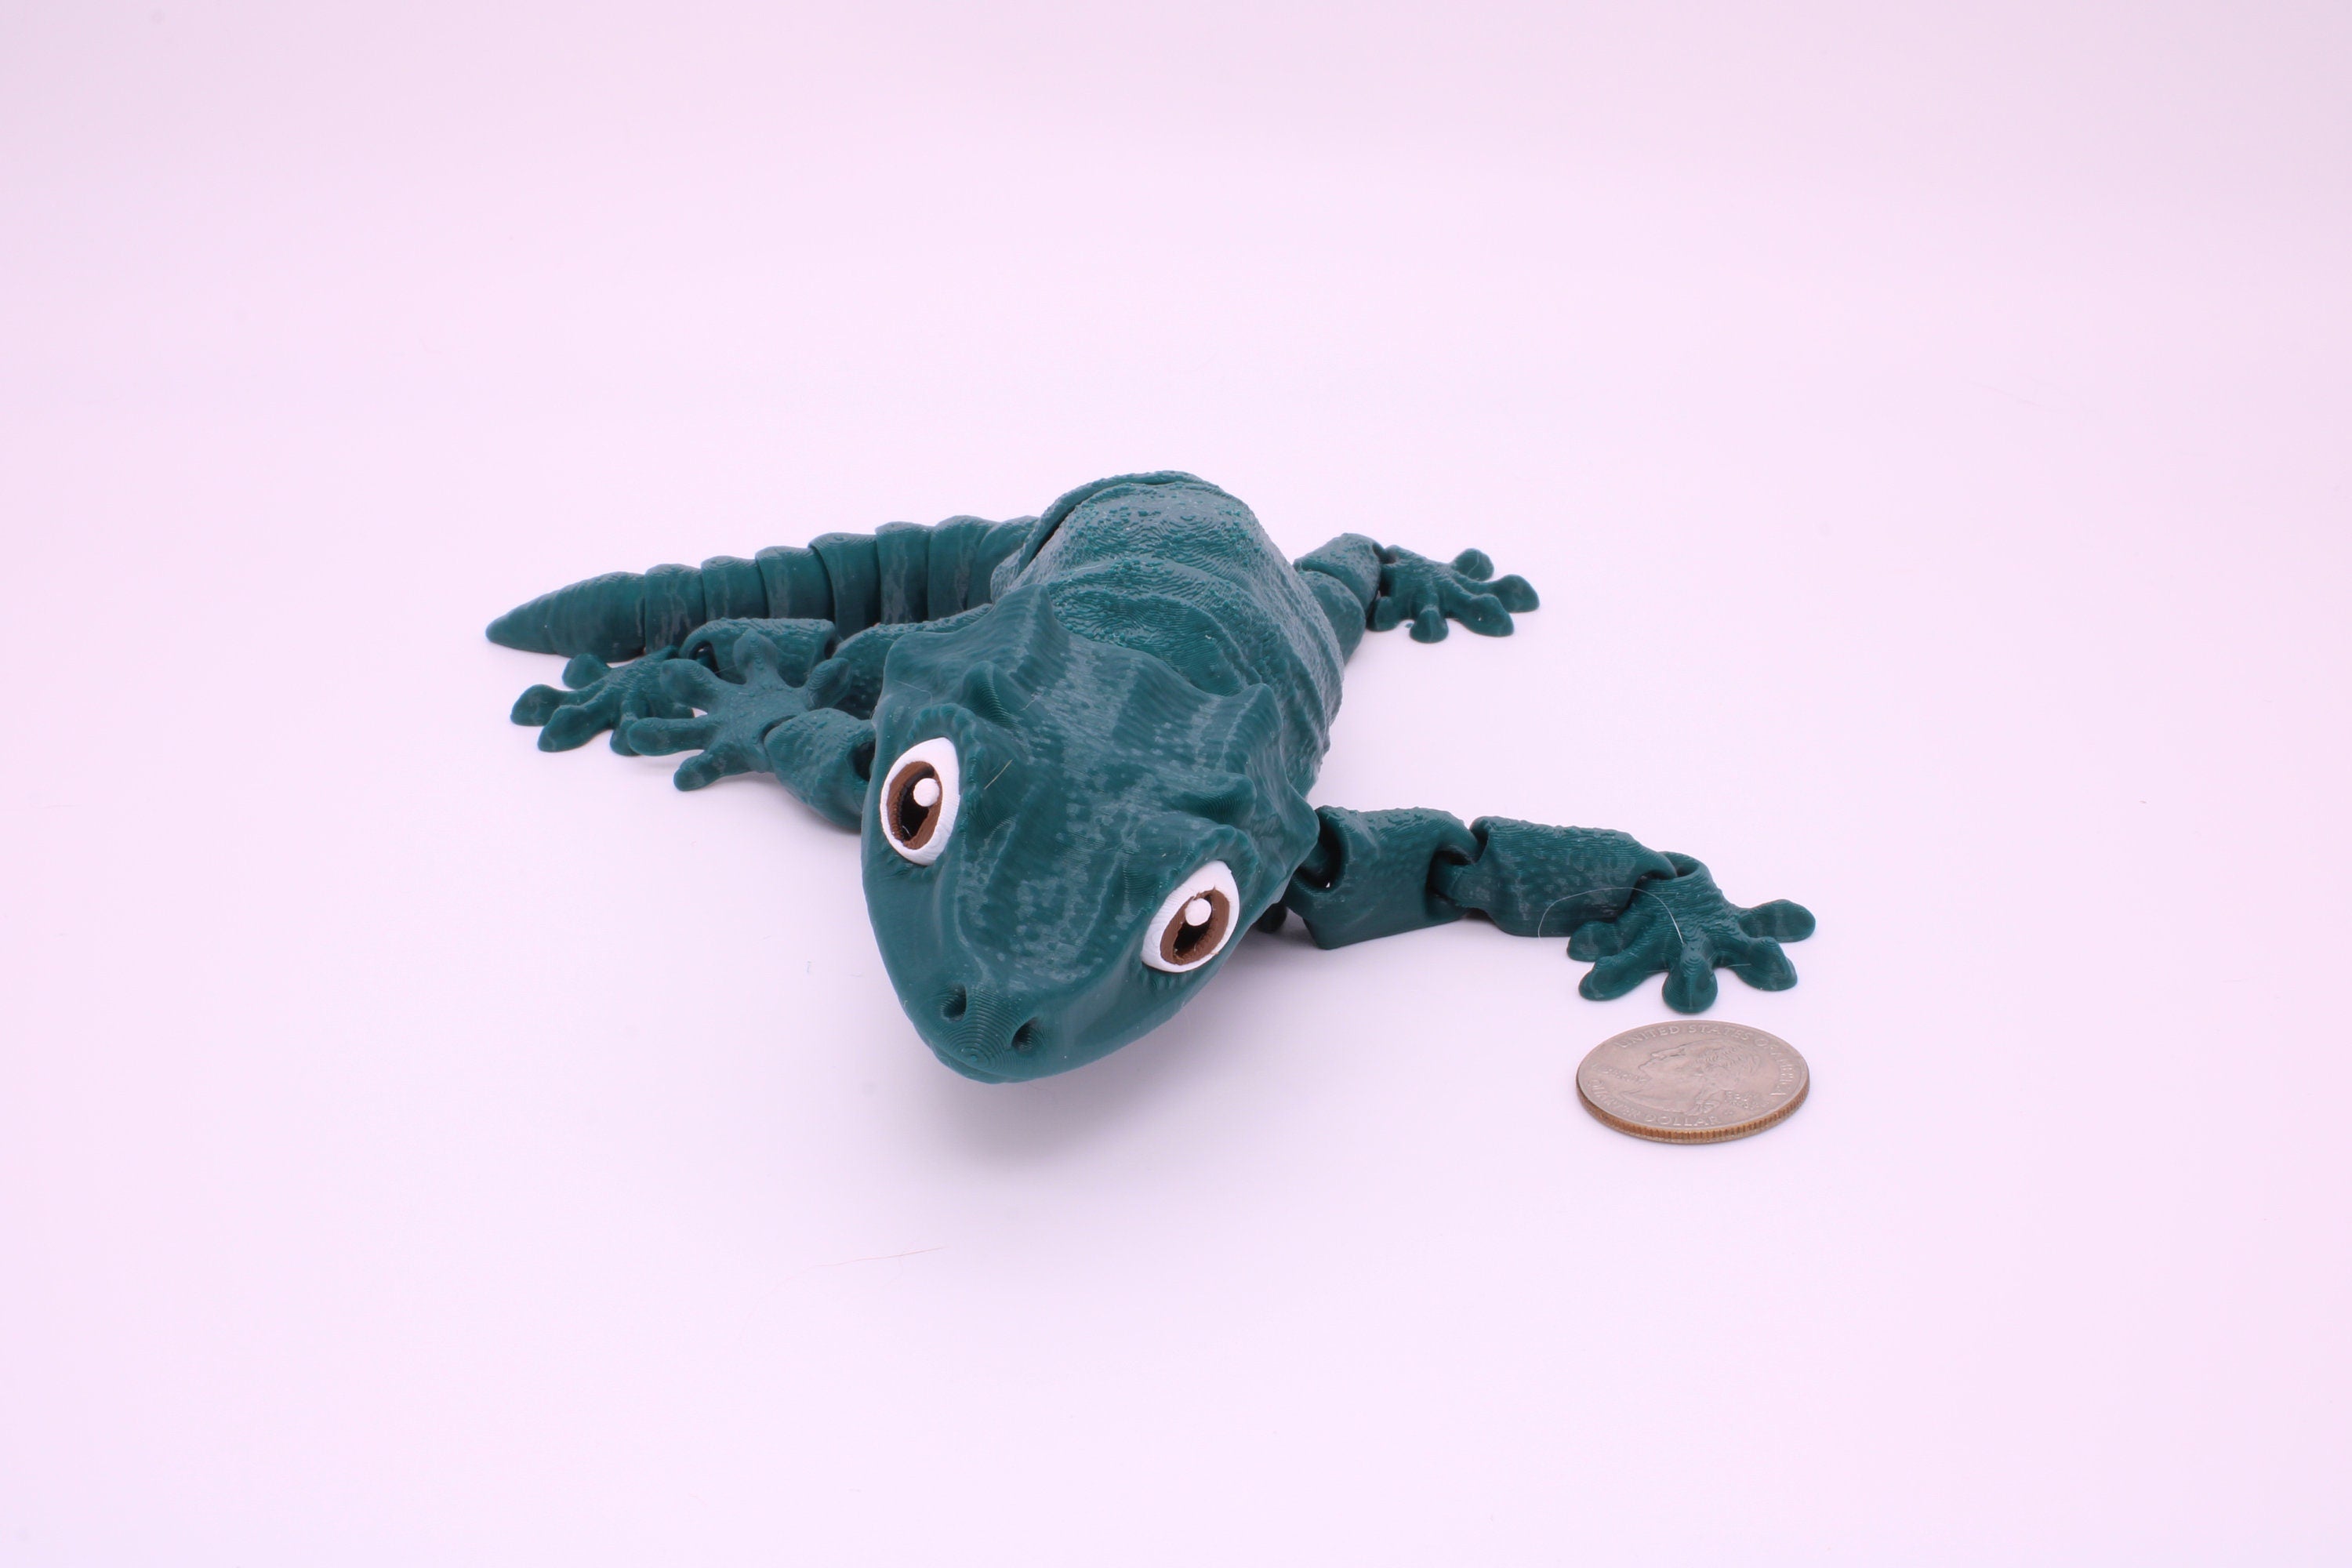 Gargoyle Gecko - Green with colored eyes | Flexi Toy | Articulating Fidget Toy | Made to Order